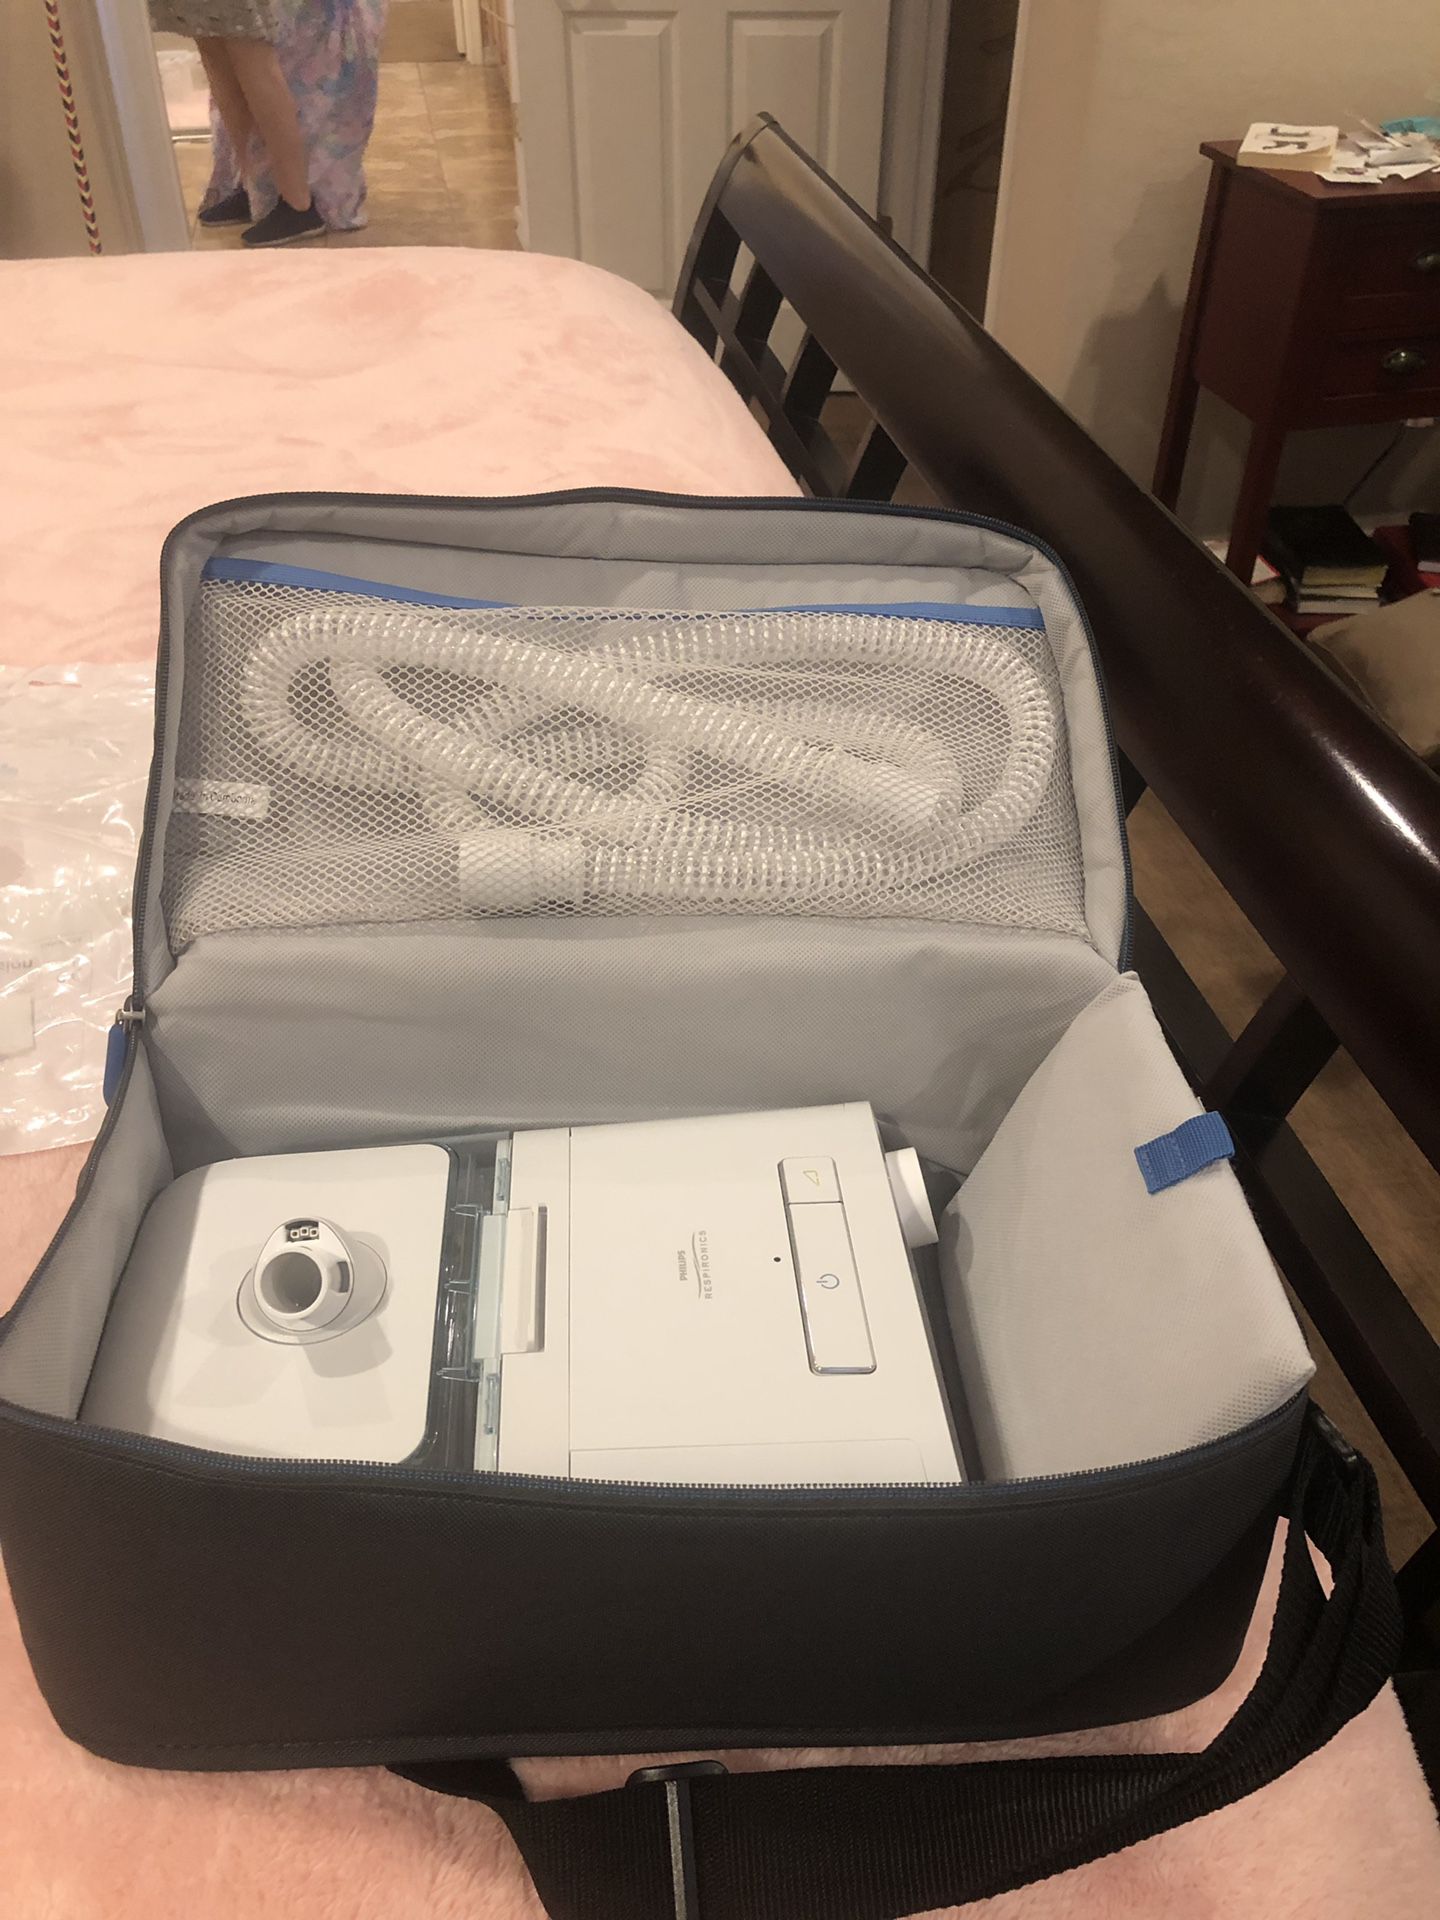 Phillips dream station resperonic cpap machine with built in humidifier